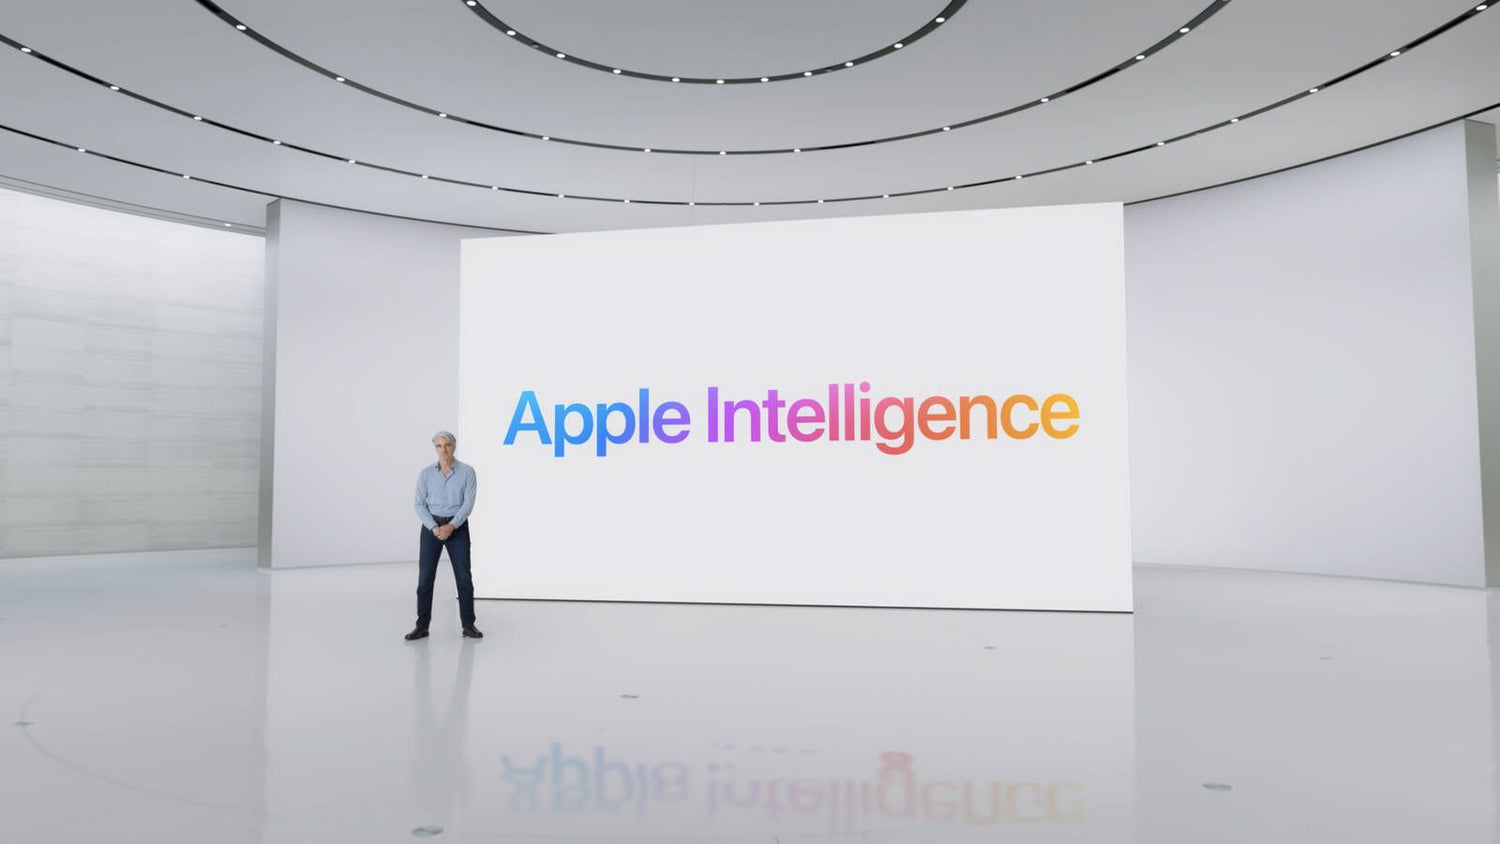 Apple Intelligence Apple's AI features coming to iPhones, Macs, and iPads